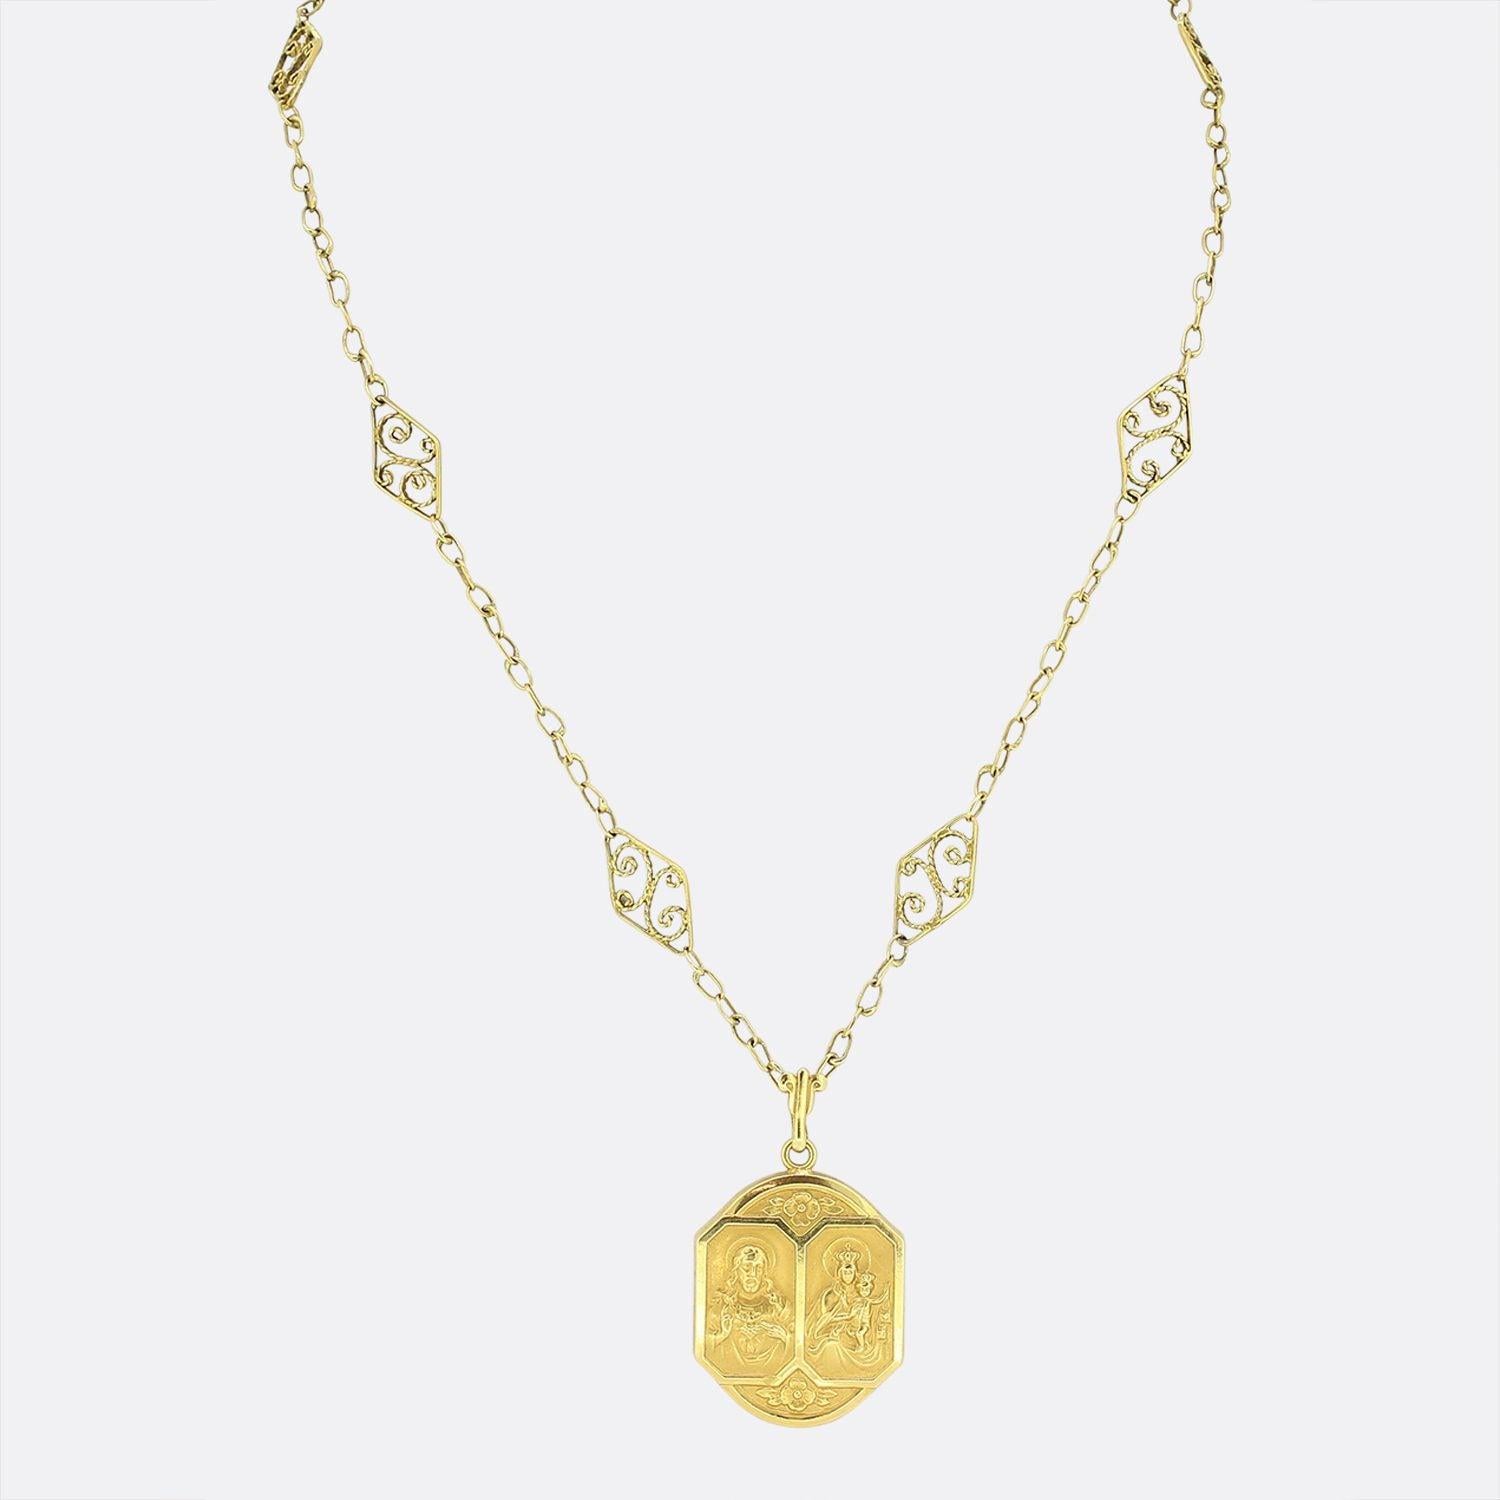 This is a wonderfully crafted vintage 18ct yellow gold necklace. The pendant features two separately bordered portraits; one representing the Holy Sacred heart of Jesus Christ and the other featuring our lady of Scapular with a plain unembellished